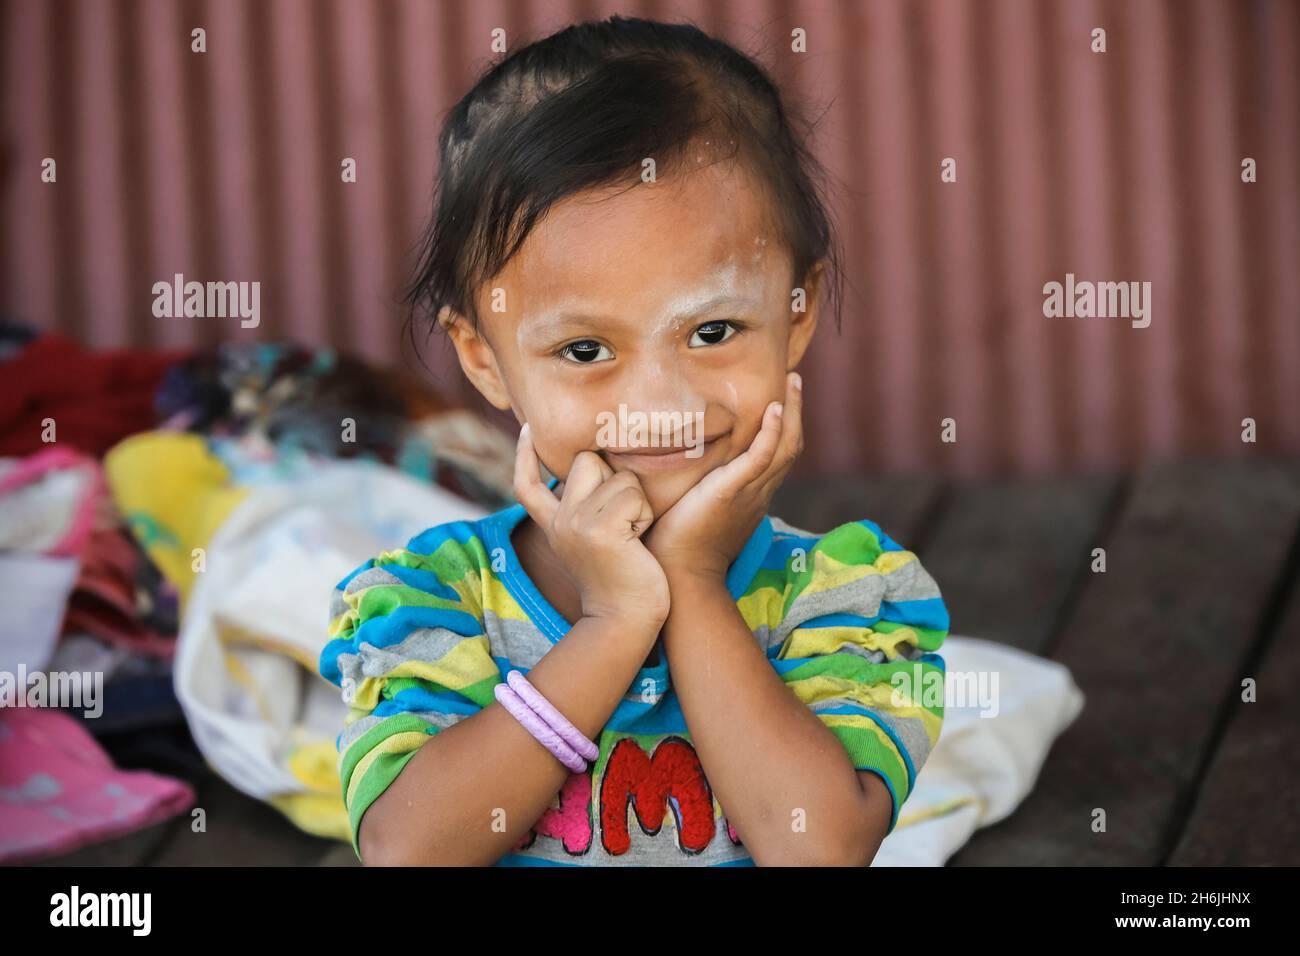 Smiling young girl at a village in karst limestone region, Rammang-Rammang, Maros, South Sulawesi, Indonesia, Southeast Asia, Asia Stock Photo